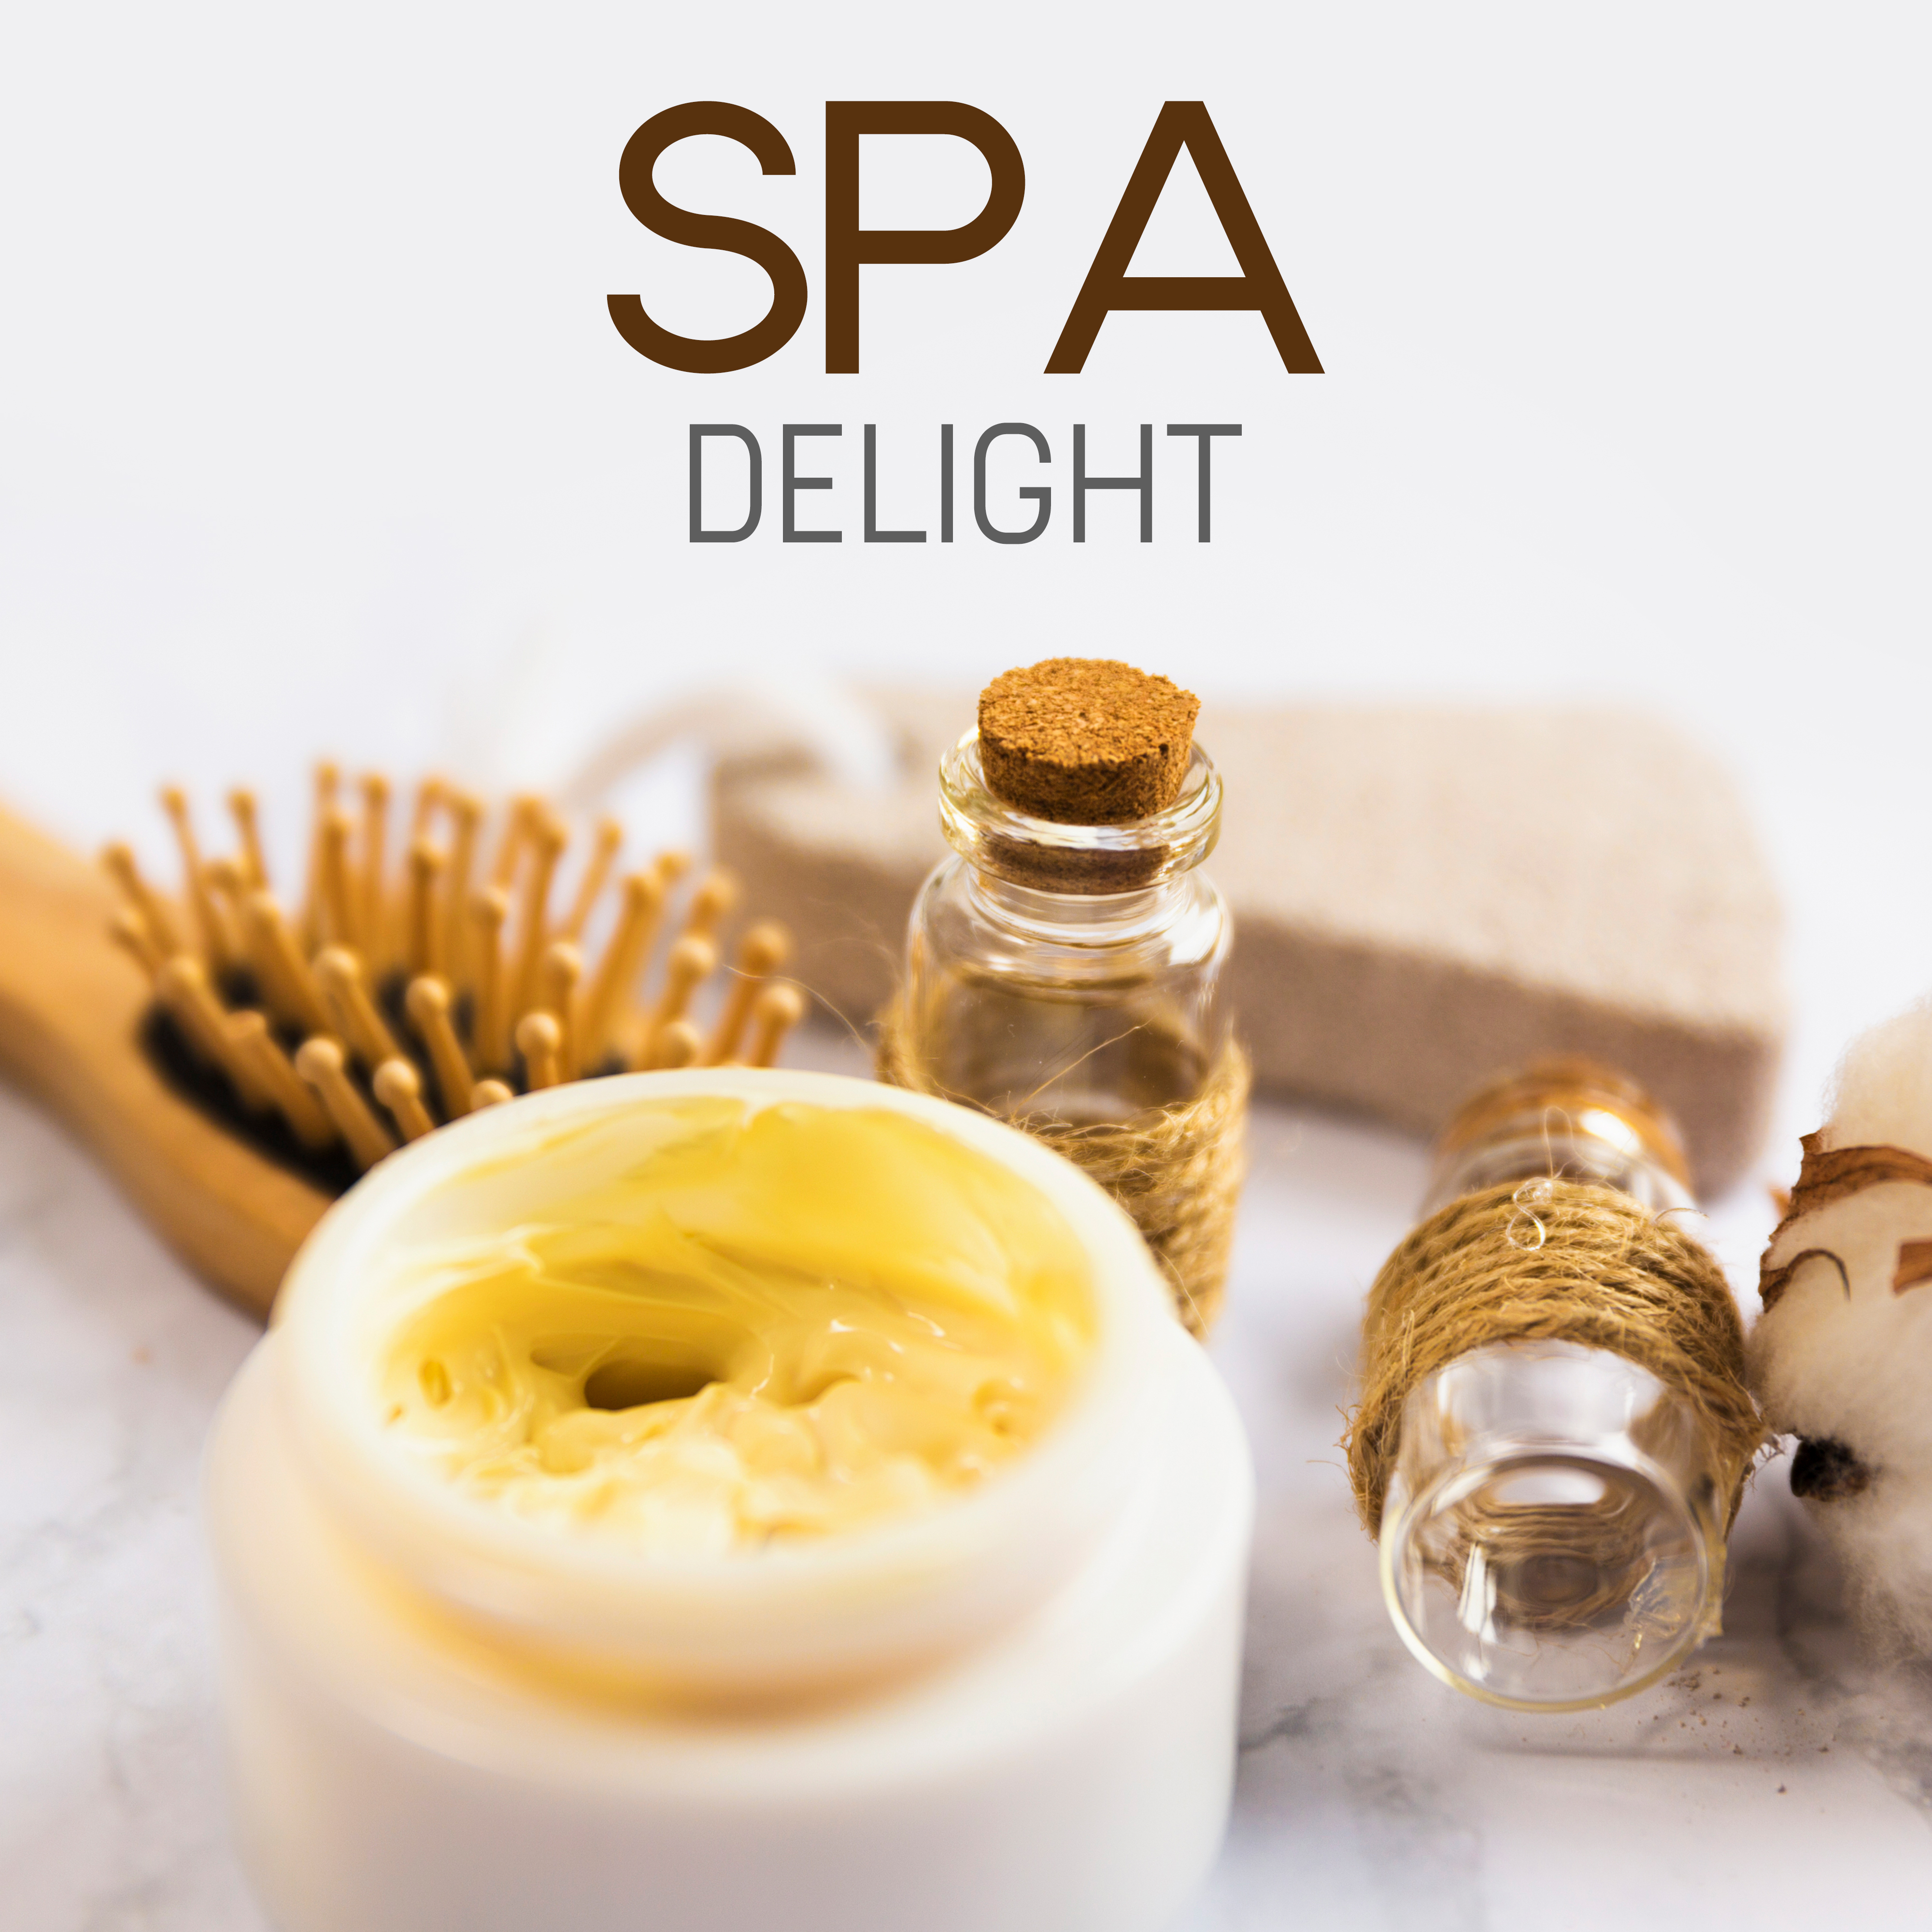 Spa Delight – Music for Hotel Spa, Spa At Home, Relaxing Sounds of Nature